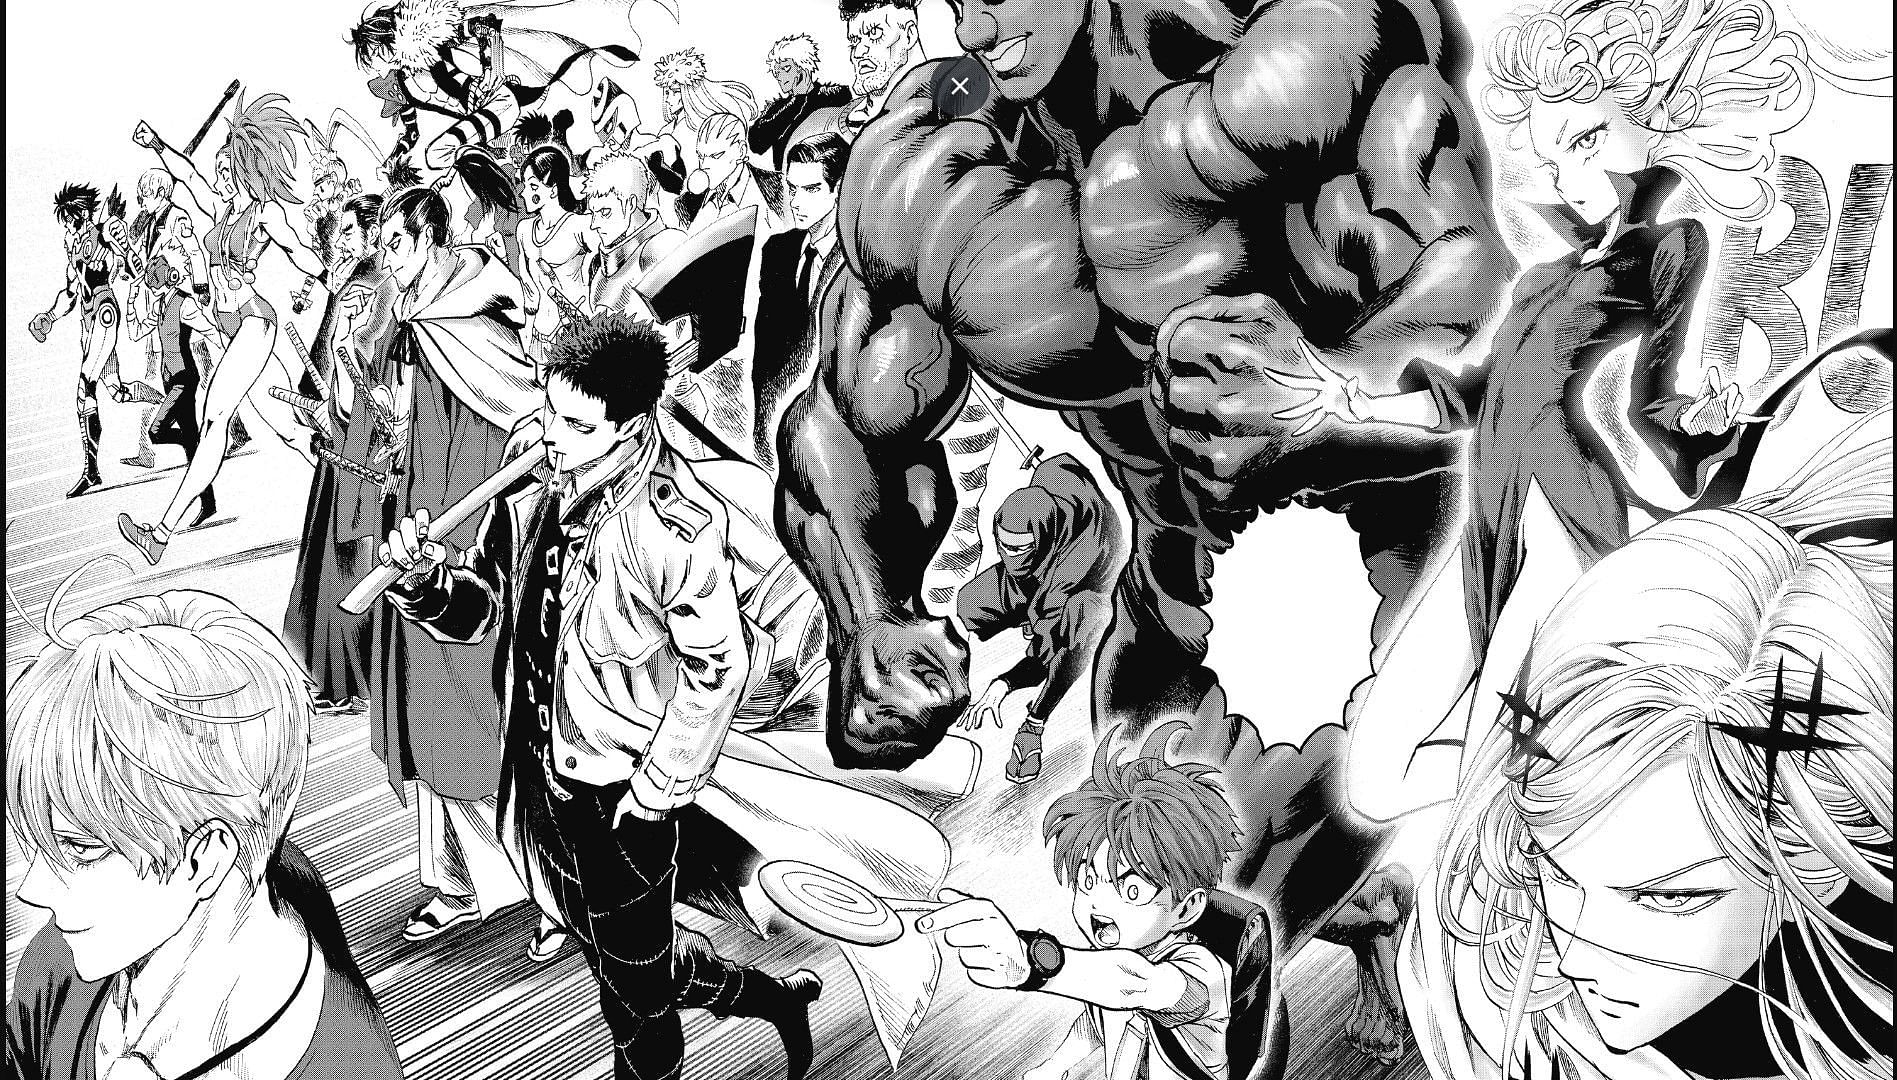 Understanding more about the sensitive situation the Heroes Association is in (Image via Yusuke Murata/ONE, Shueisha)